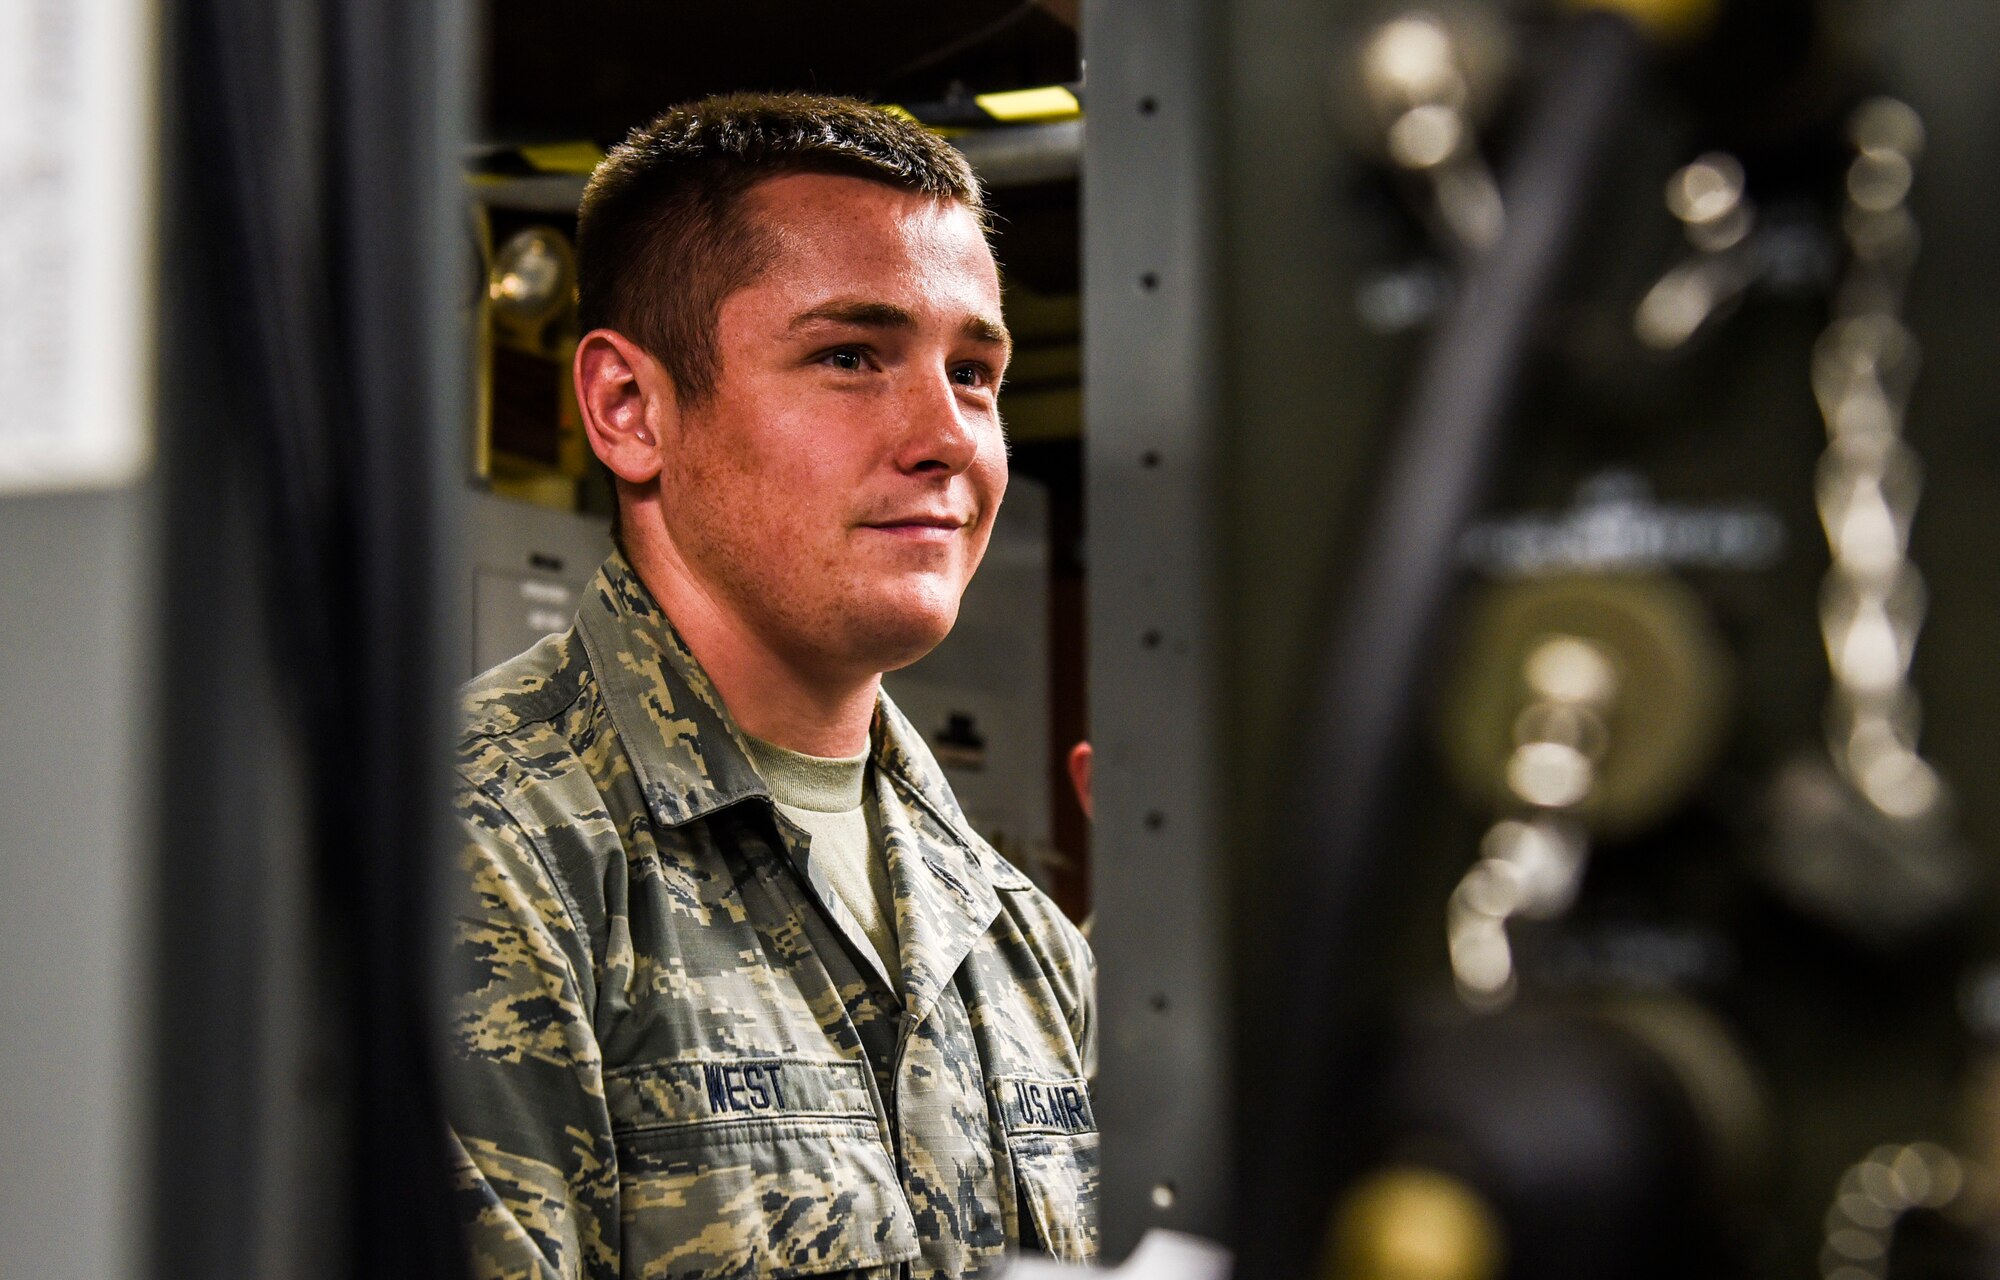 U.S. Air Force Airman 1st Class Randy West, 325th Communications Squadron radio frequency transmission systems apprentice, assesses radio equipment in the RF transmission systems shop at Tyndall Air Force Base, Florida, July 16, 2018.